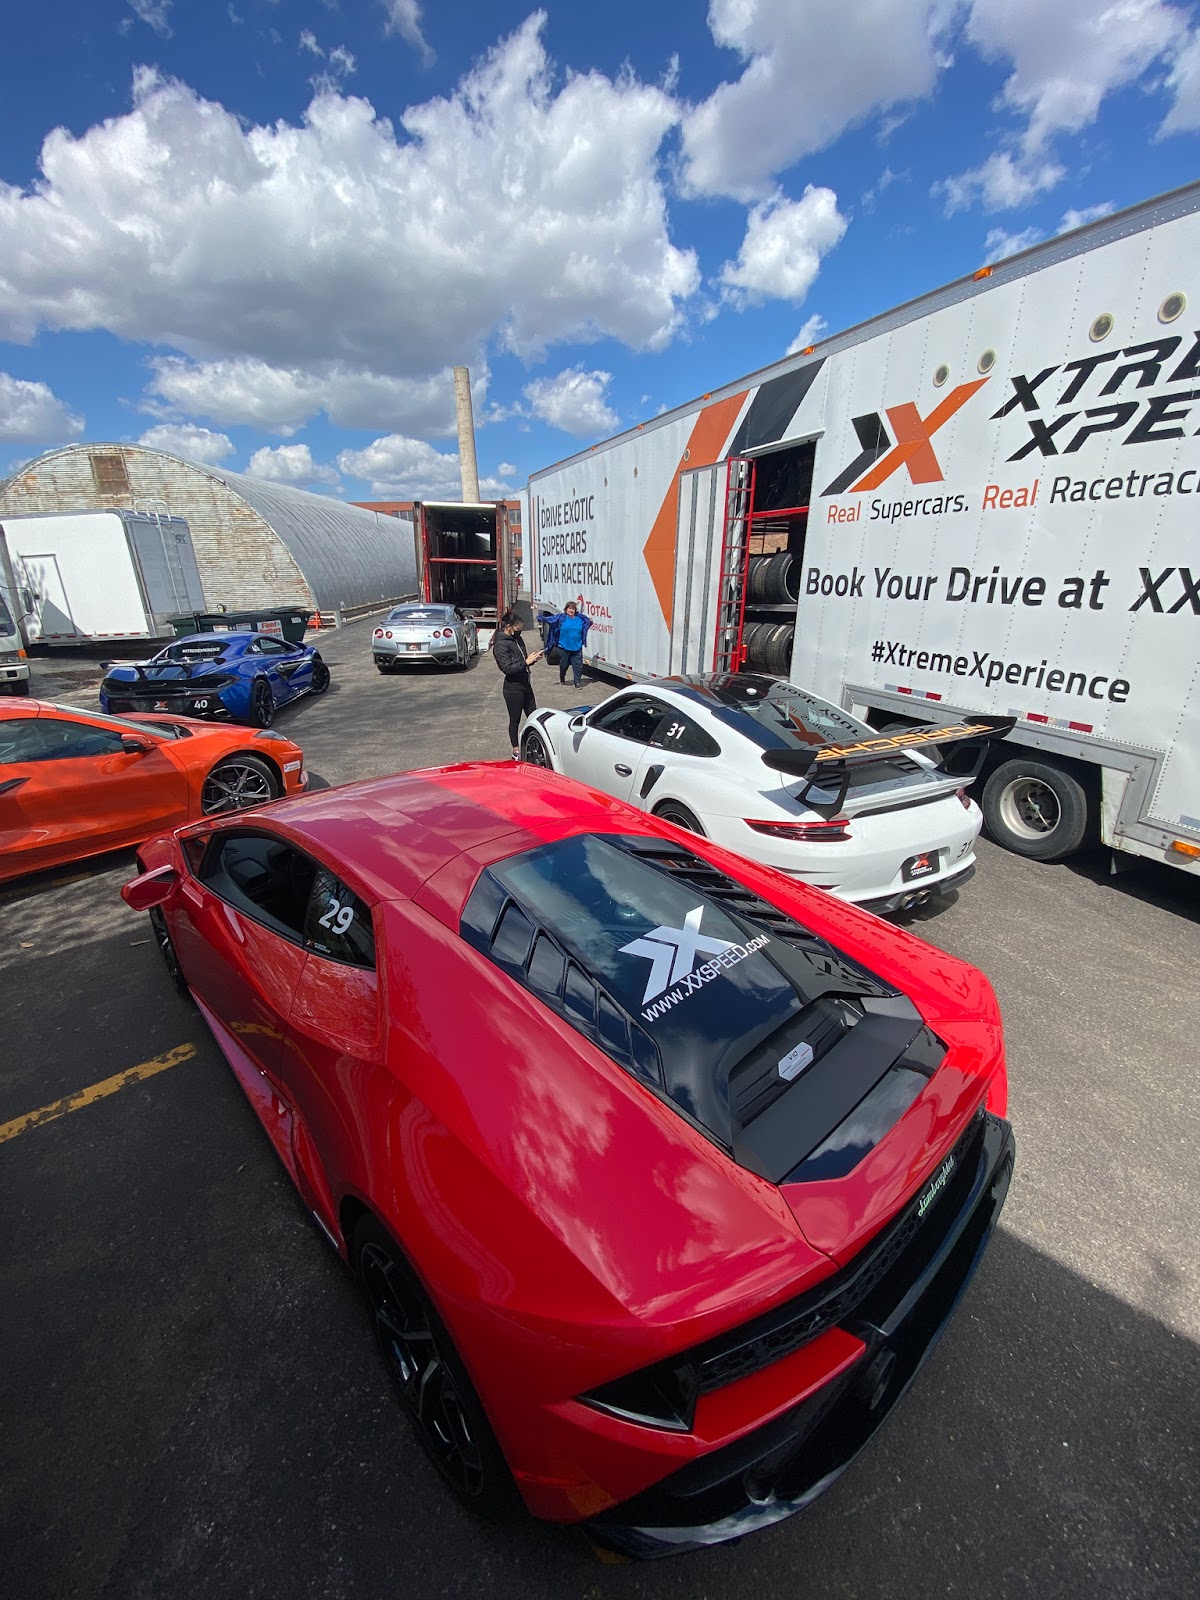 Four supercars are parked outside the Xtreme Xperience garage waiting to be loaded onto a branded semi truck.